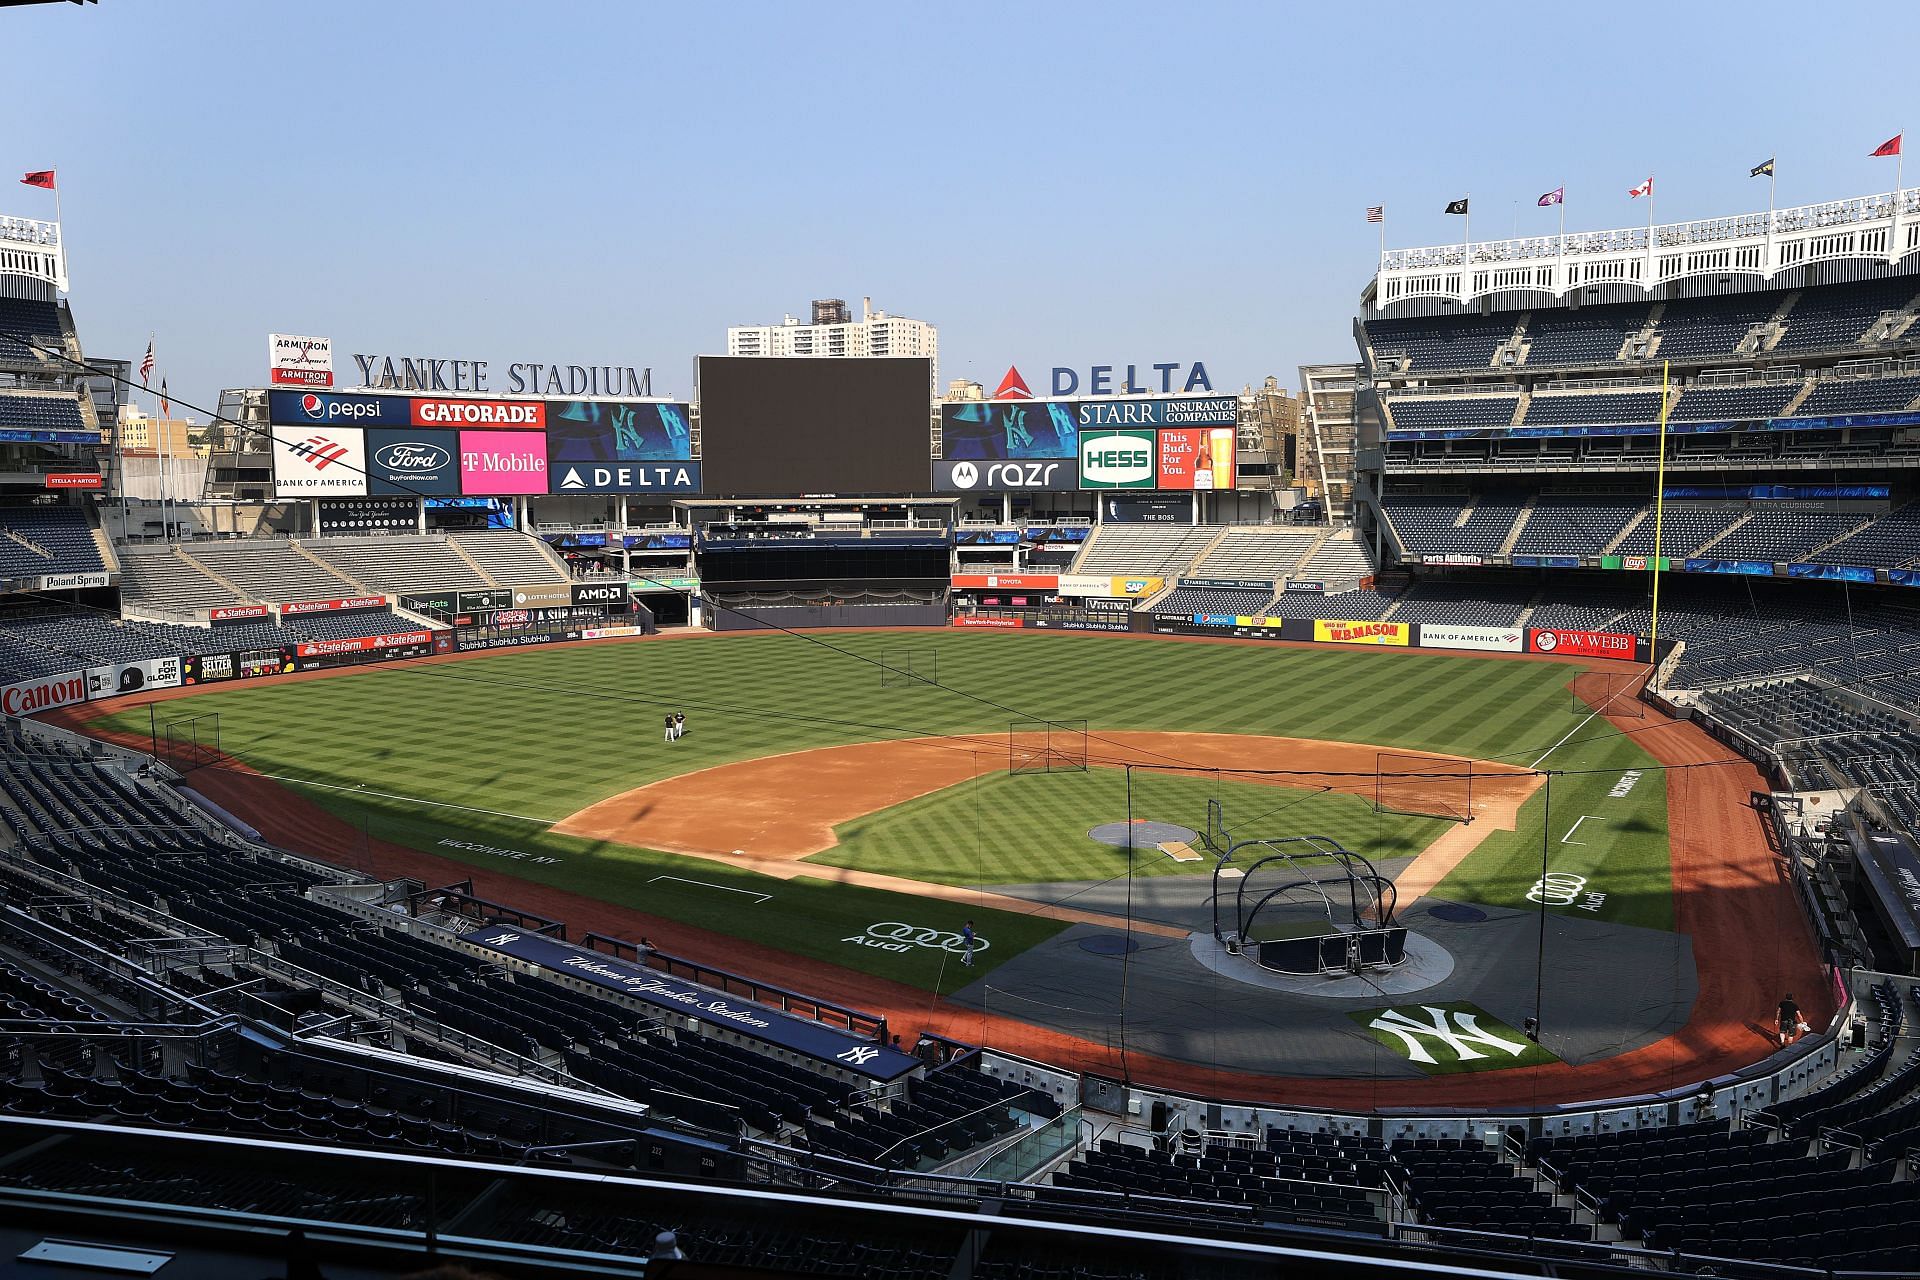 A view of Yankee Stadium after a game against the Toronto Blue Jays was cancelled on May 26, 2021